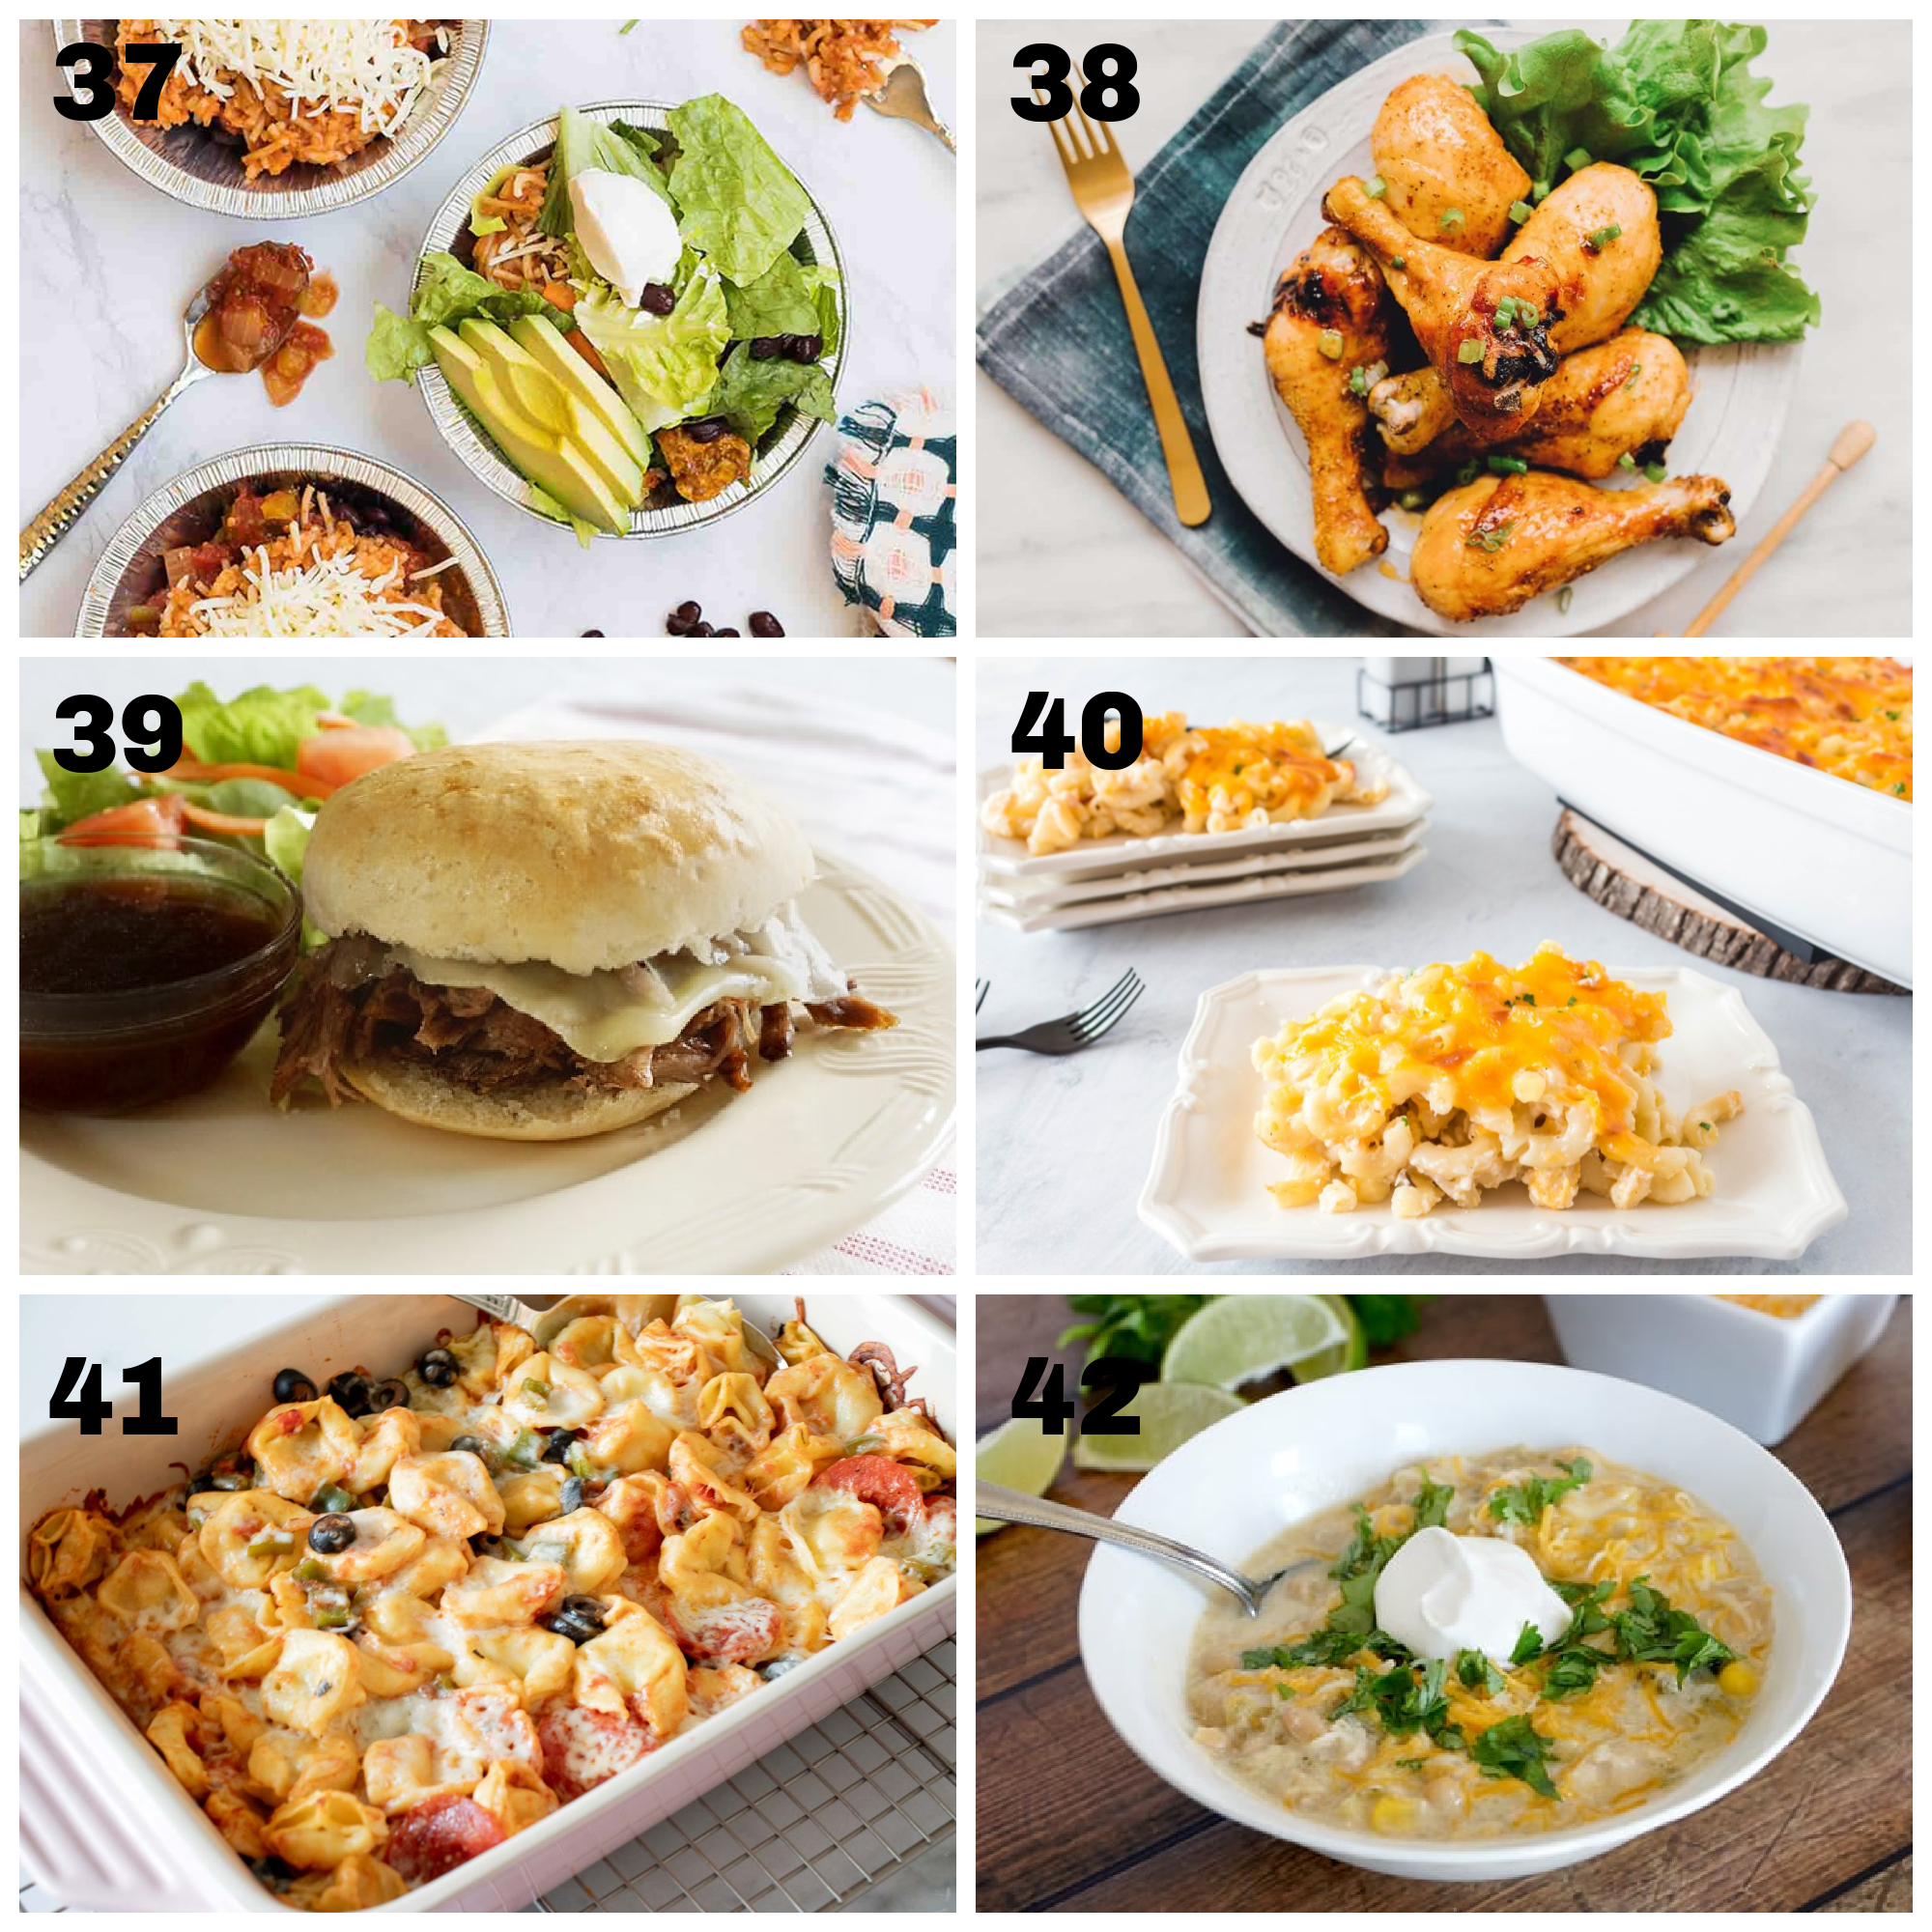 6 dinner ideas for meals for two that are make ahead and freezer-friendly labeled 37-42.